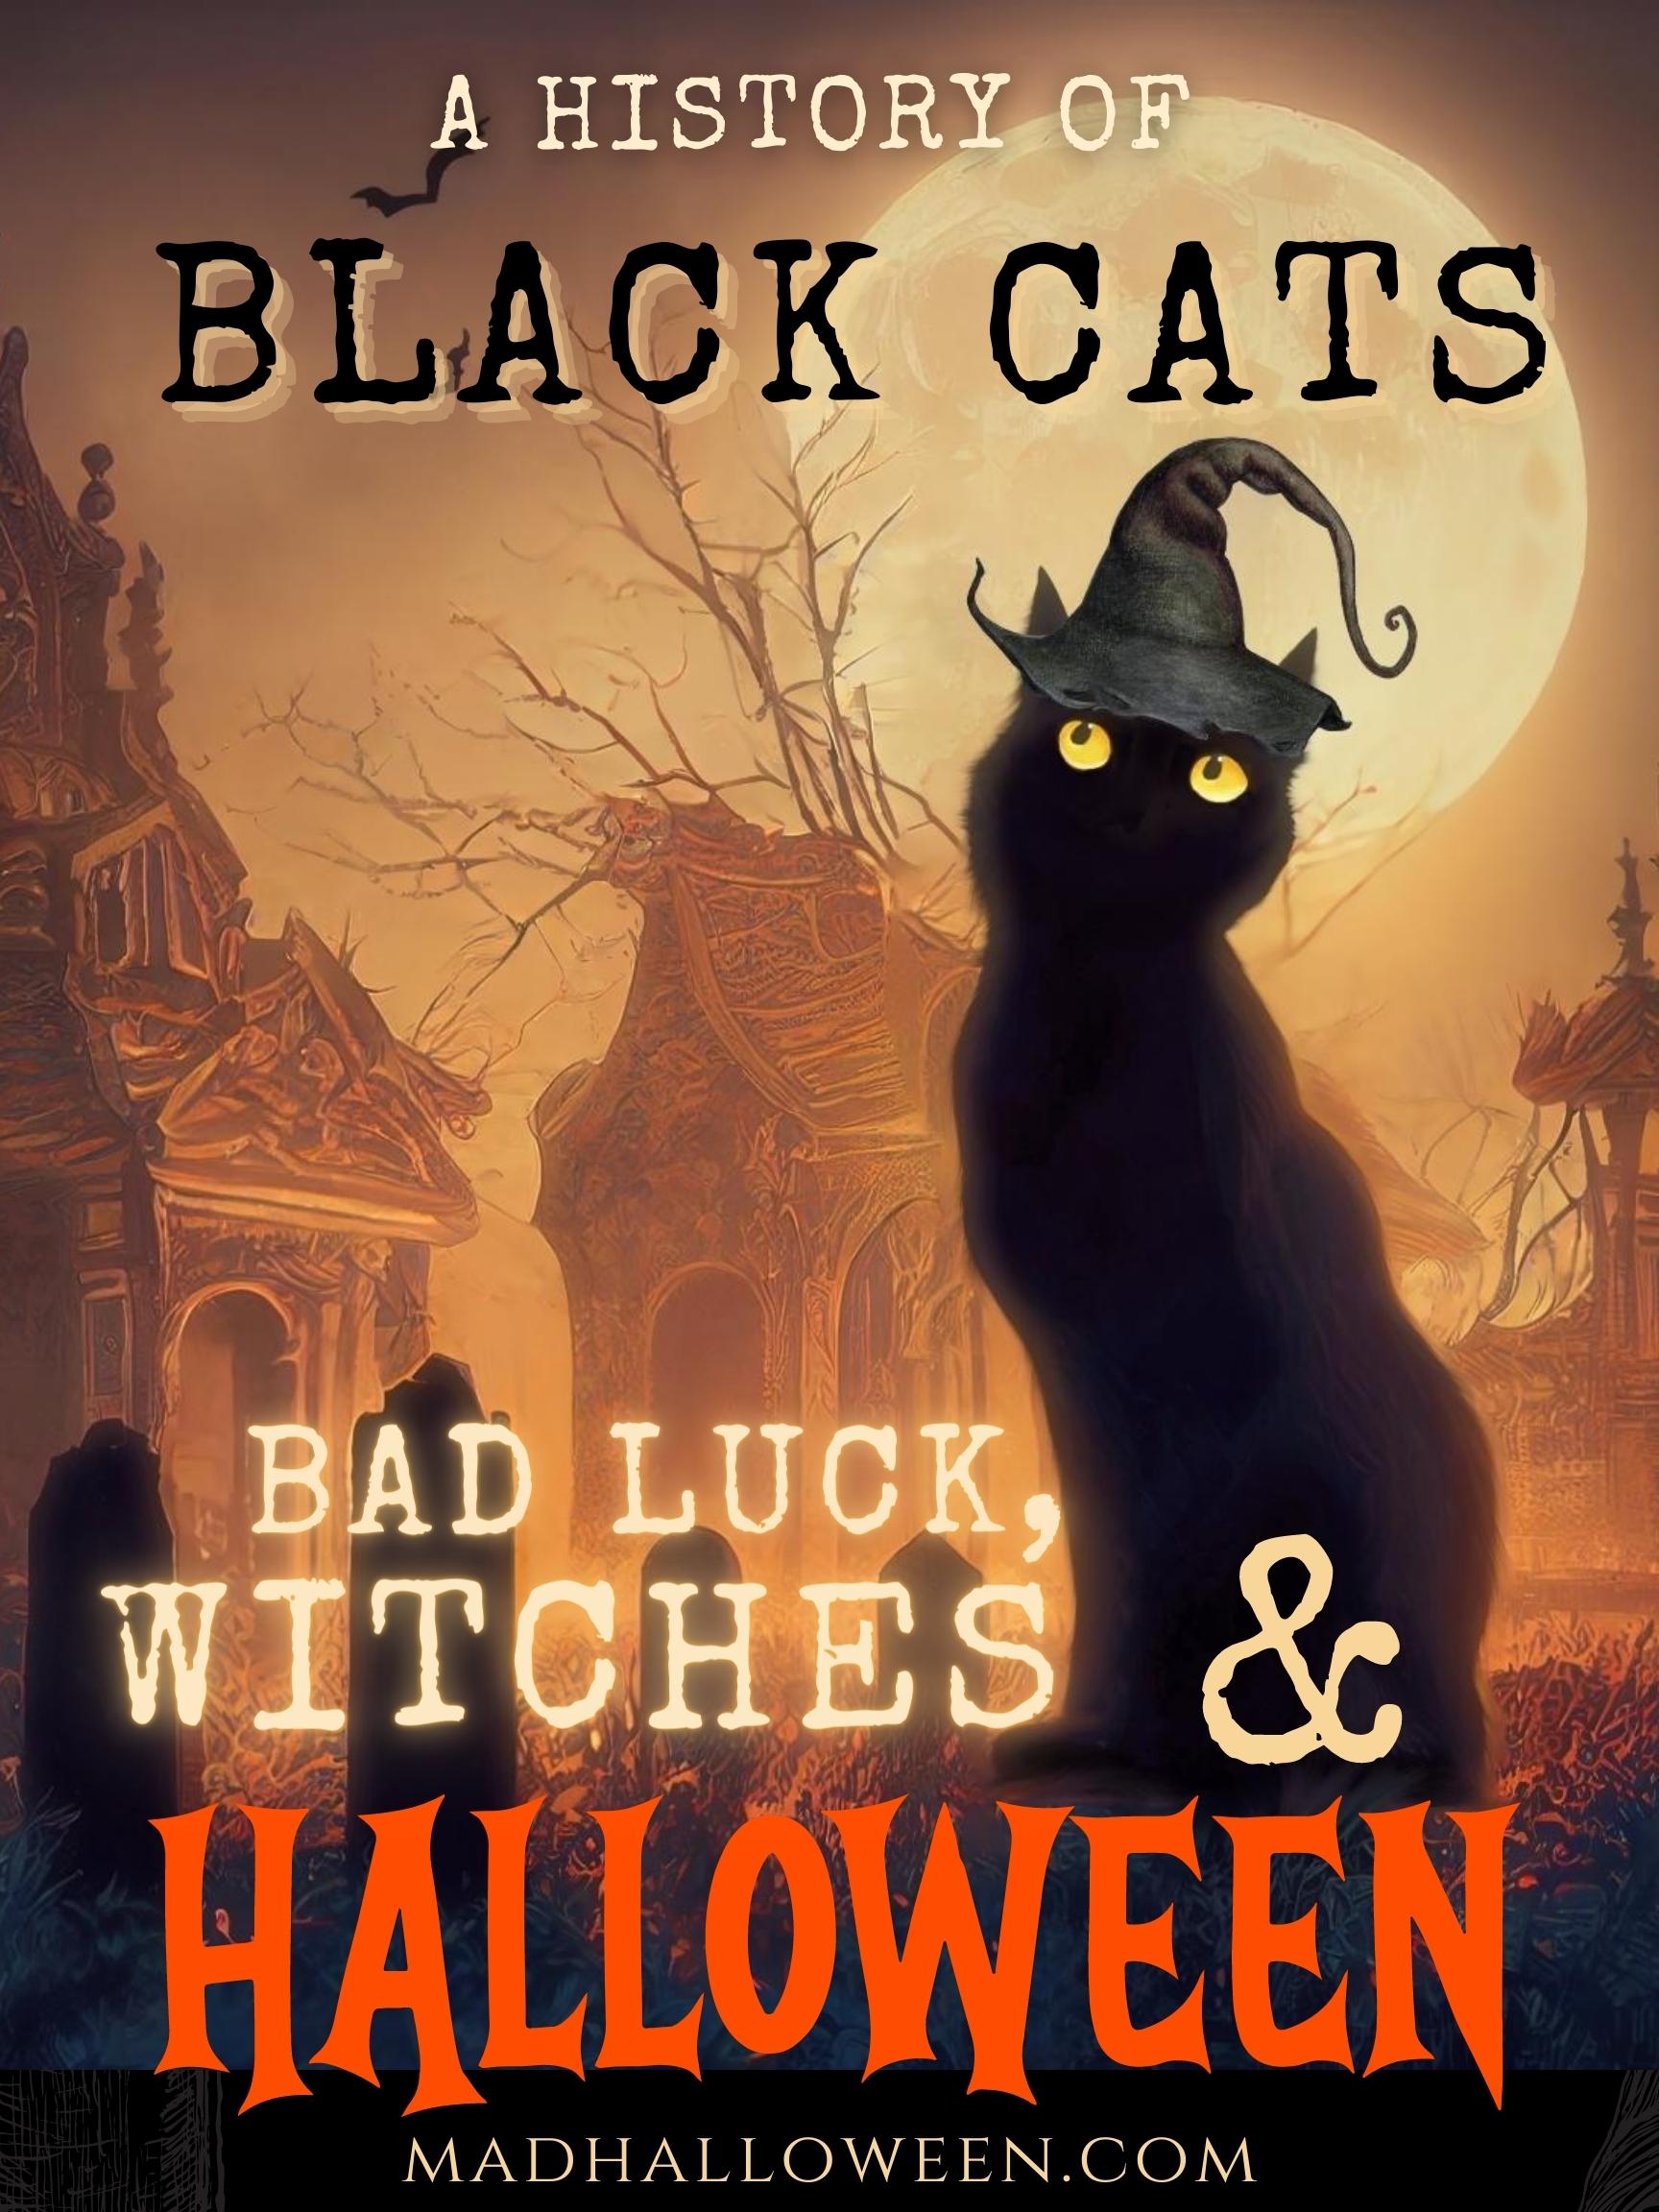 History of Black Cats, Bad Luck, Witches, and Halloween - Mad Halloween